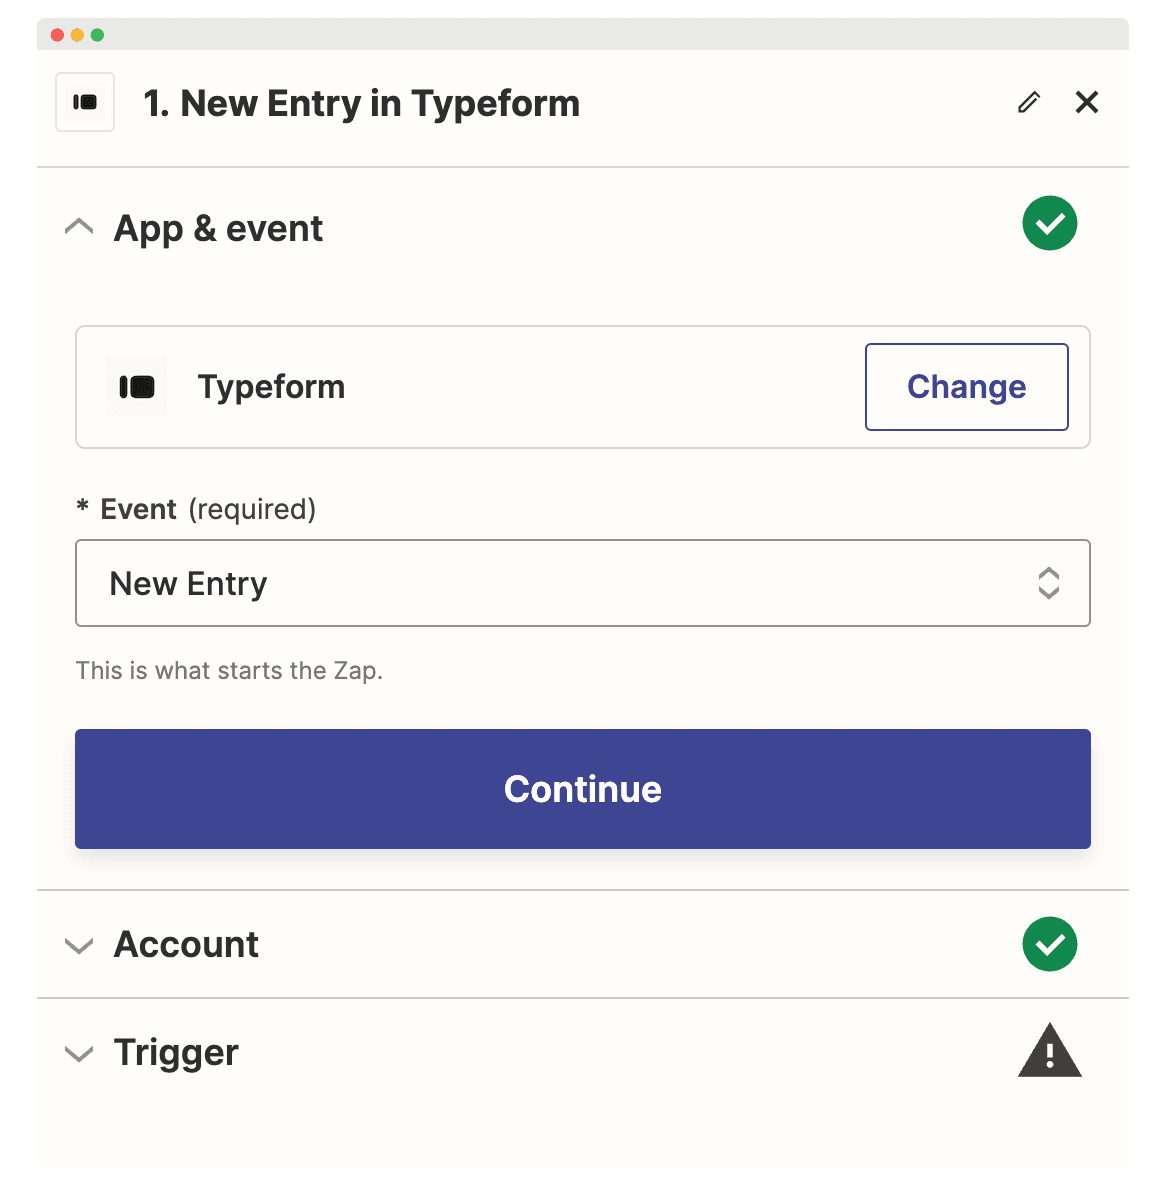 Setting up a new entry in Typeform as a Trigger to create certificates.